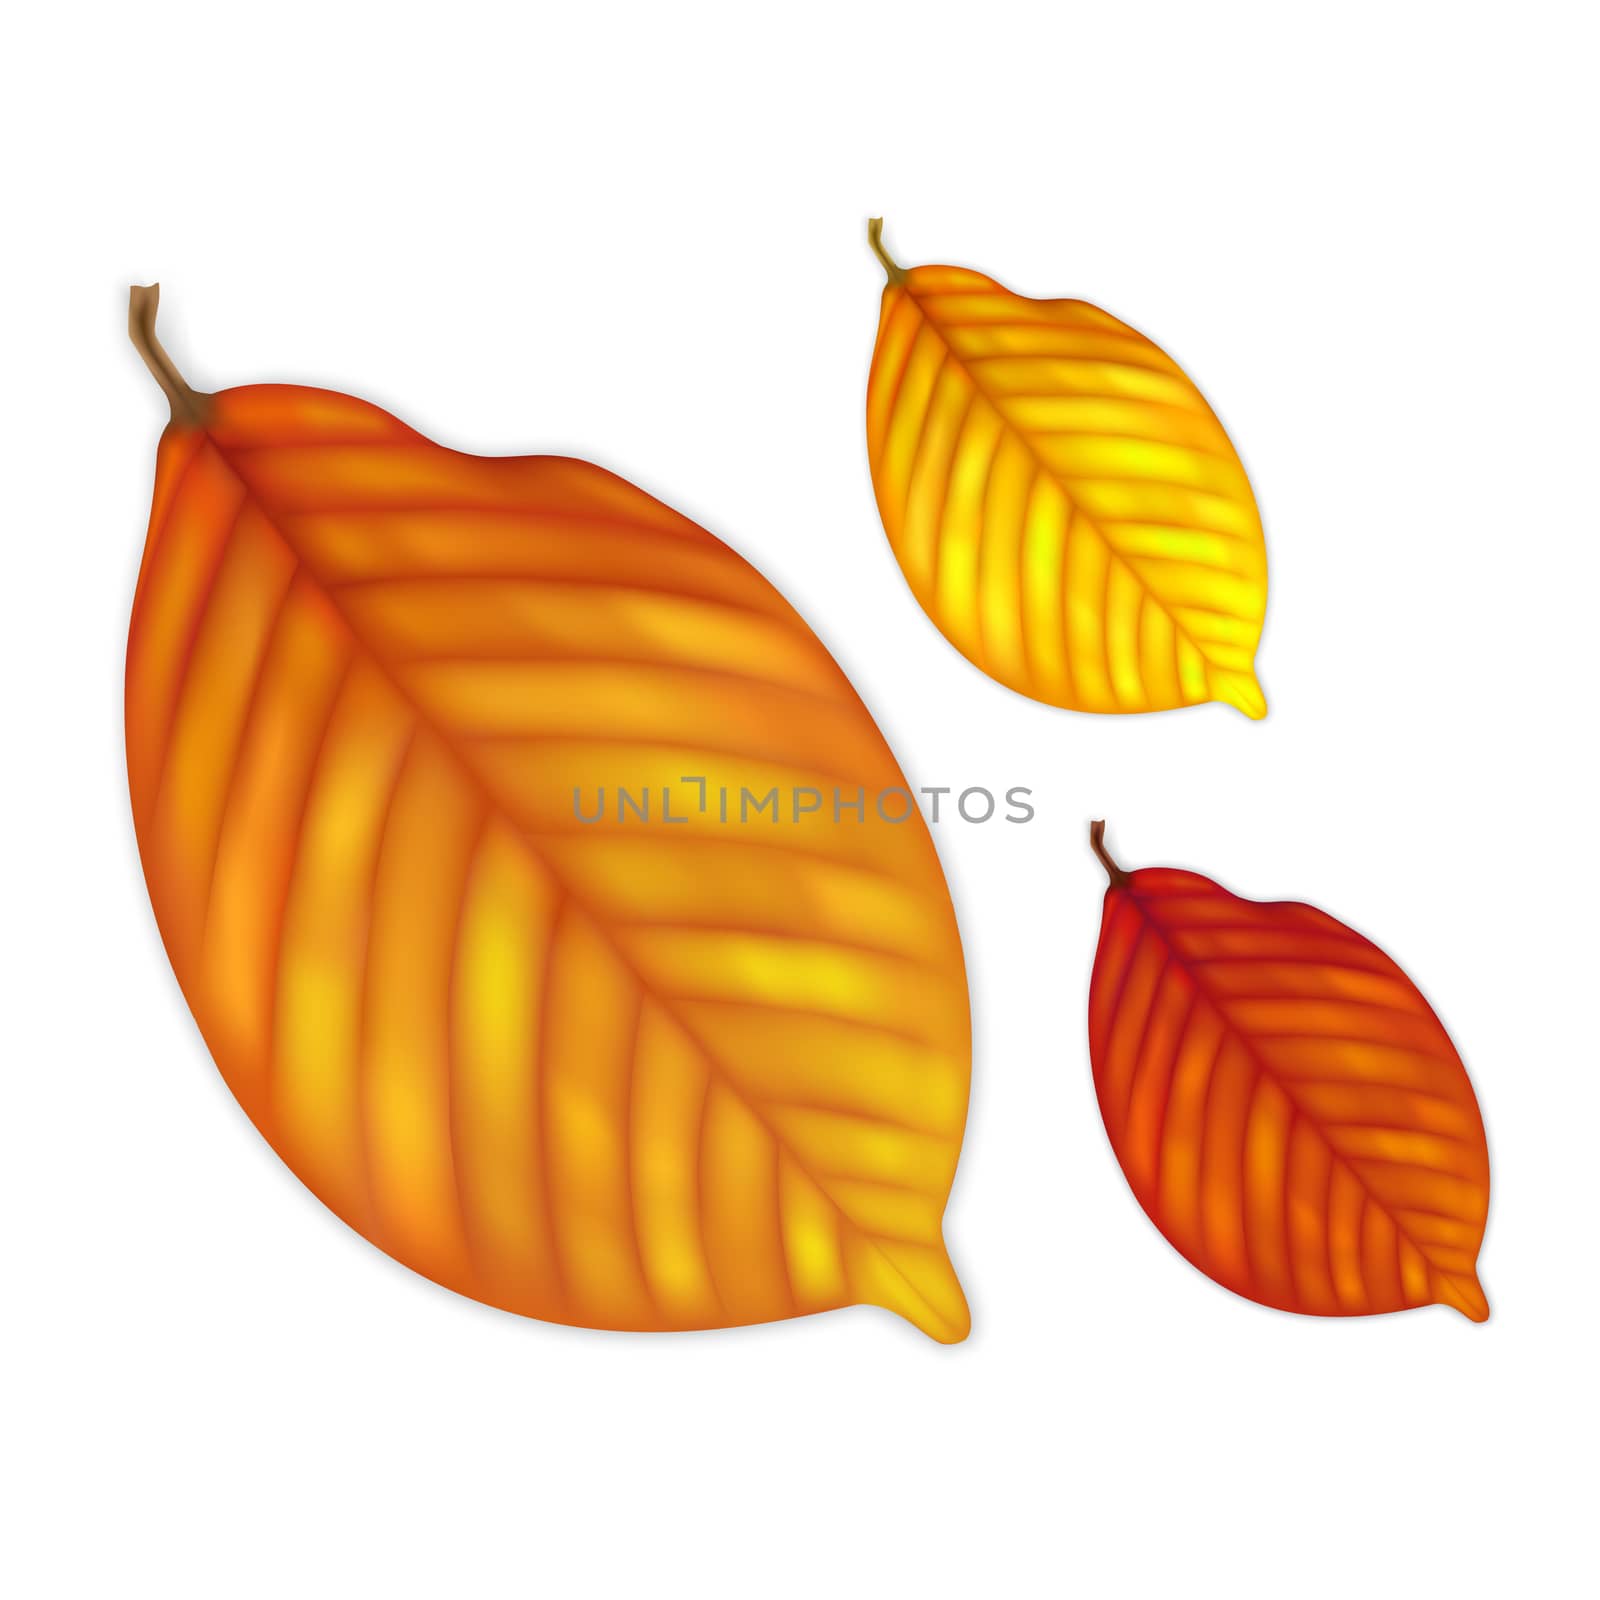 Highly detailed autumn leaves. Illustration contains gradient mesh